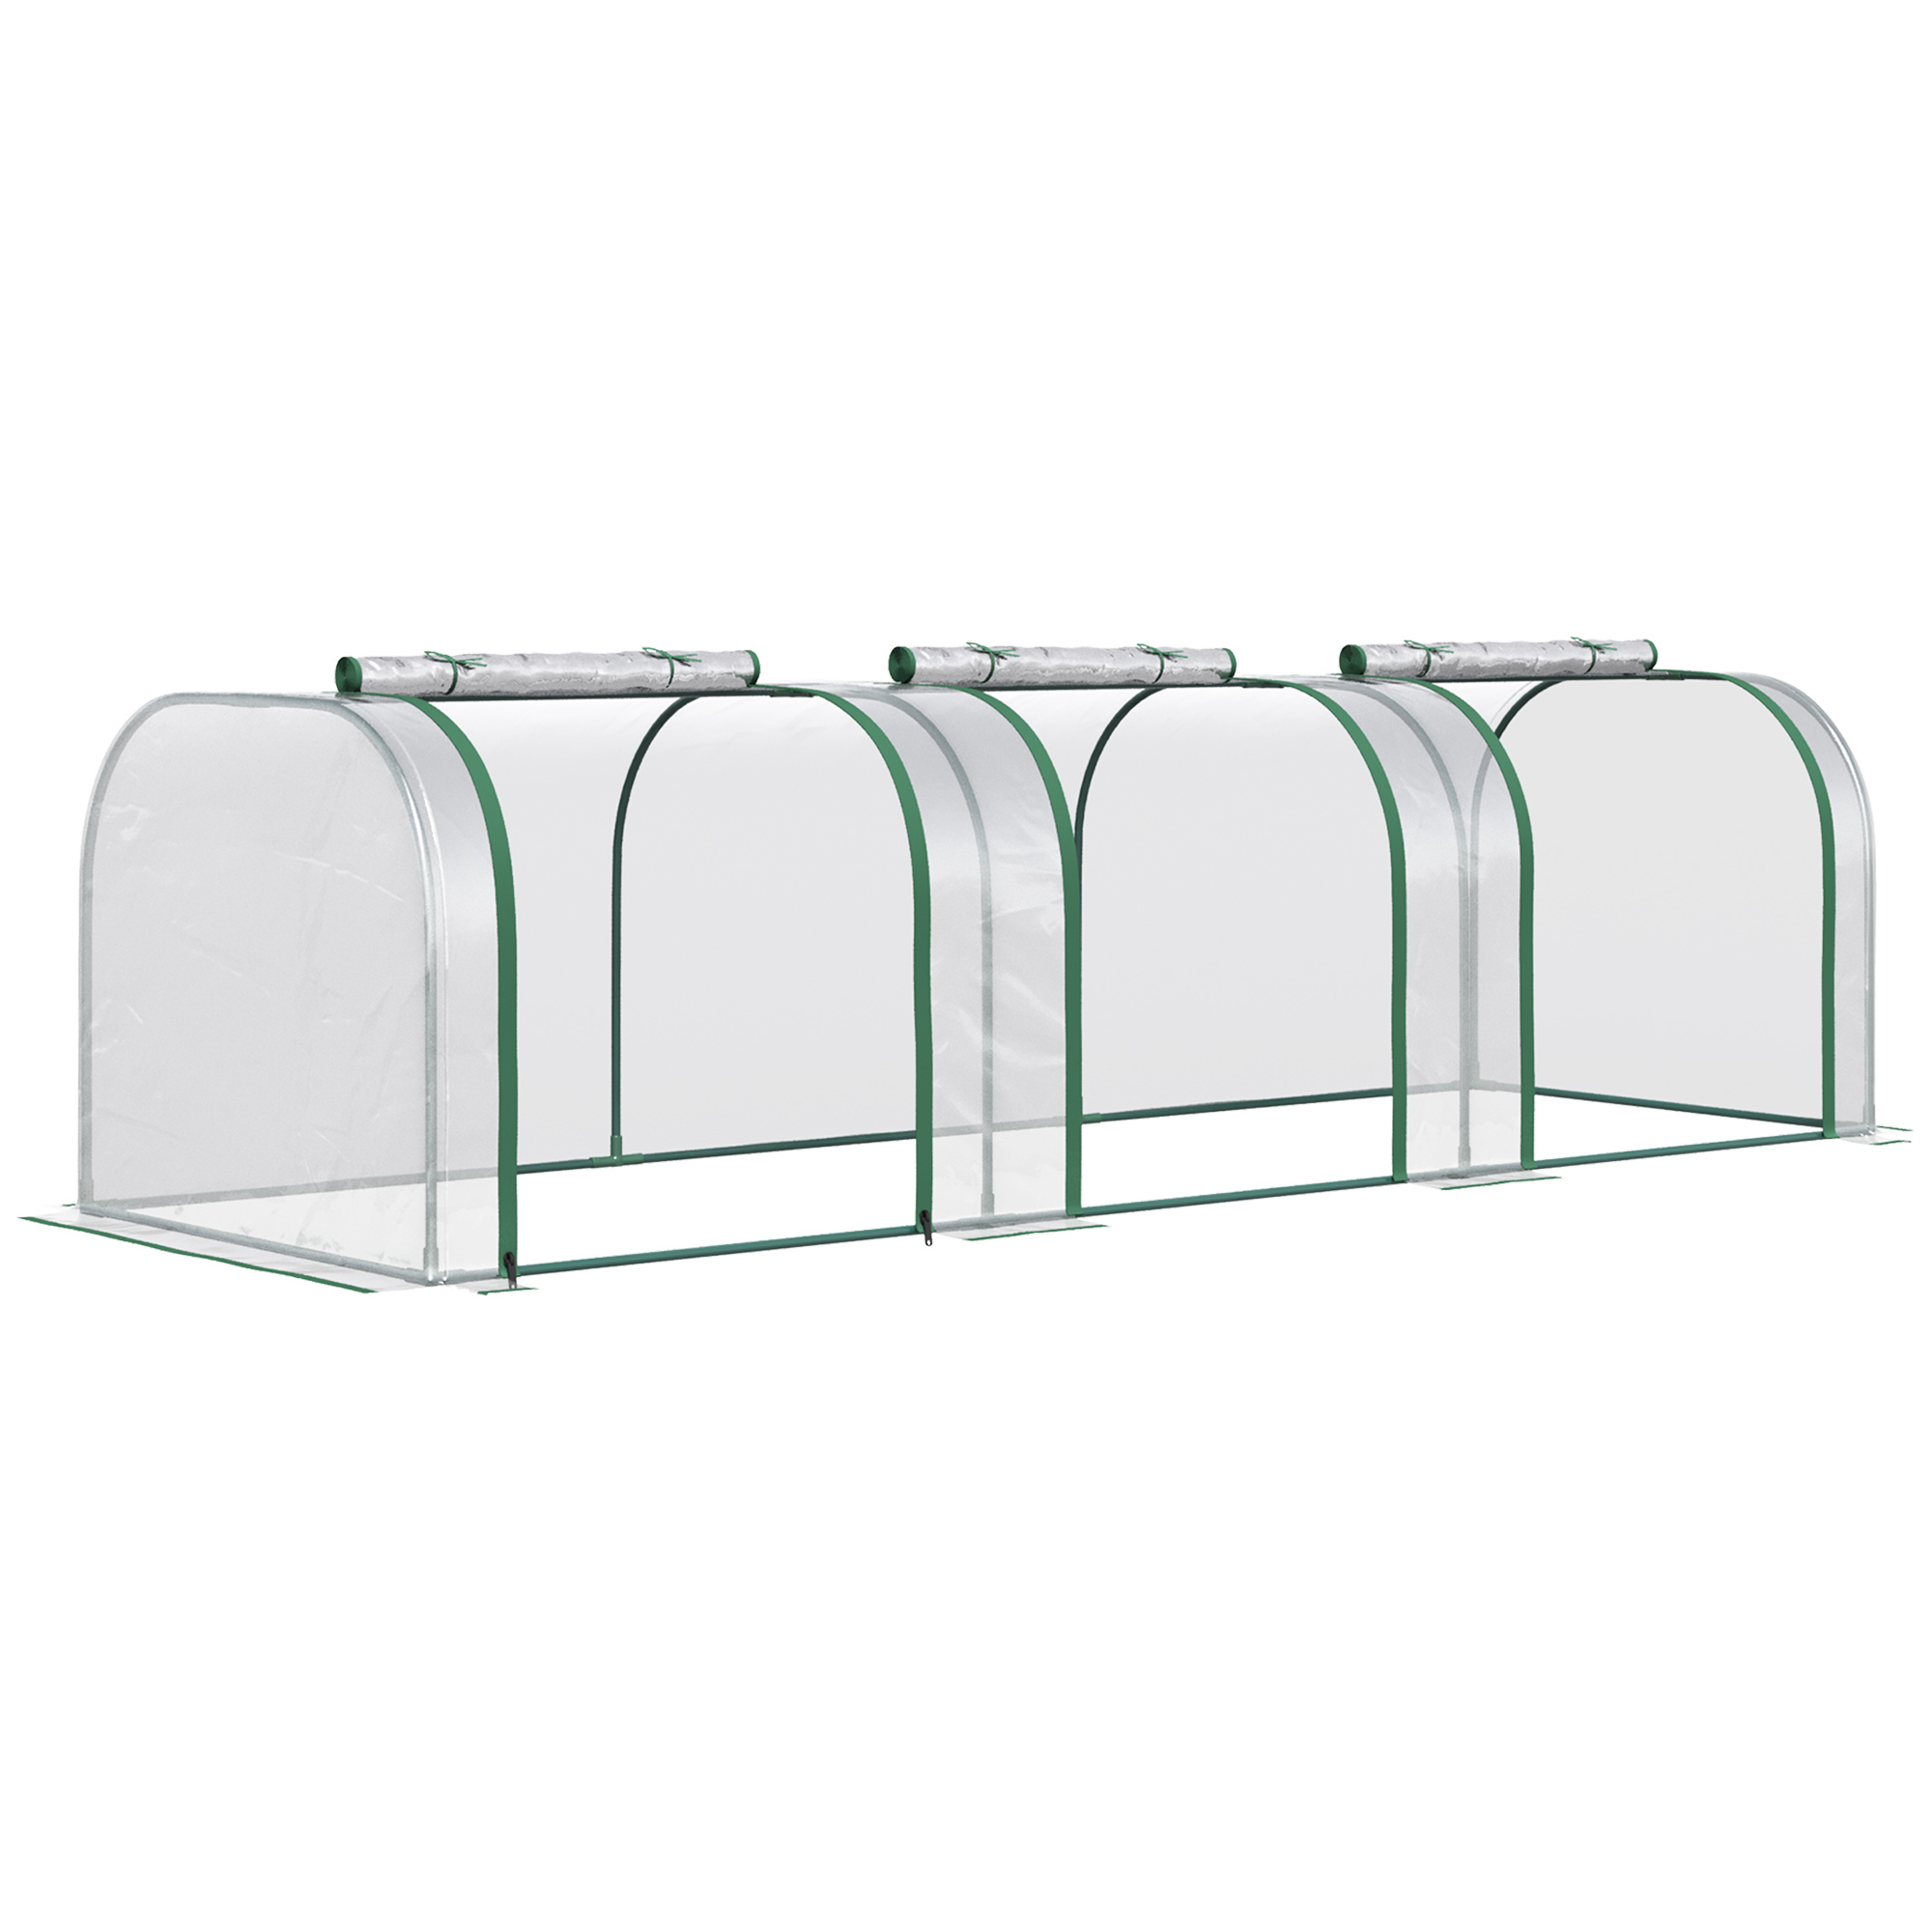 Portable Tunneled Greenhouse with 3 Zippered Doors